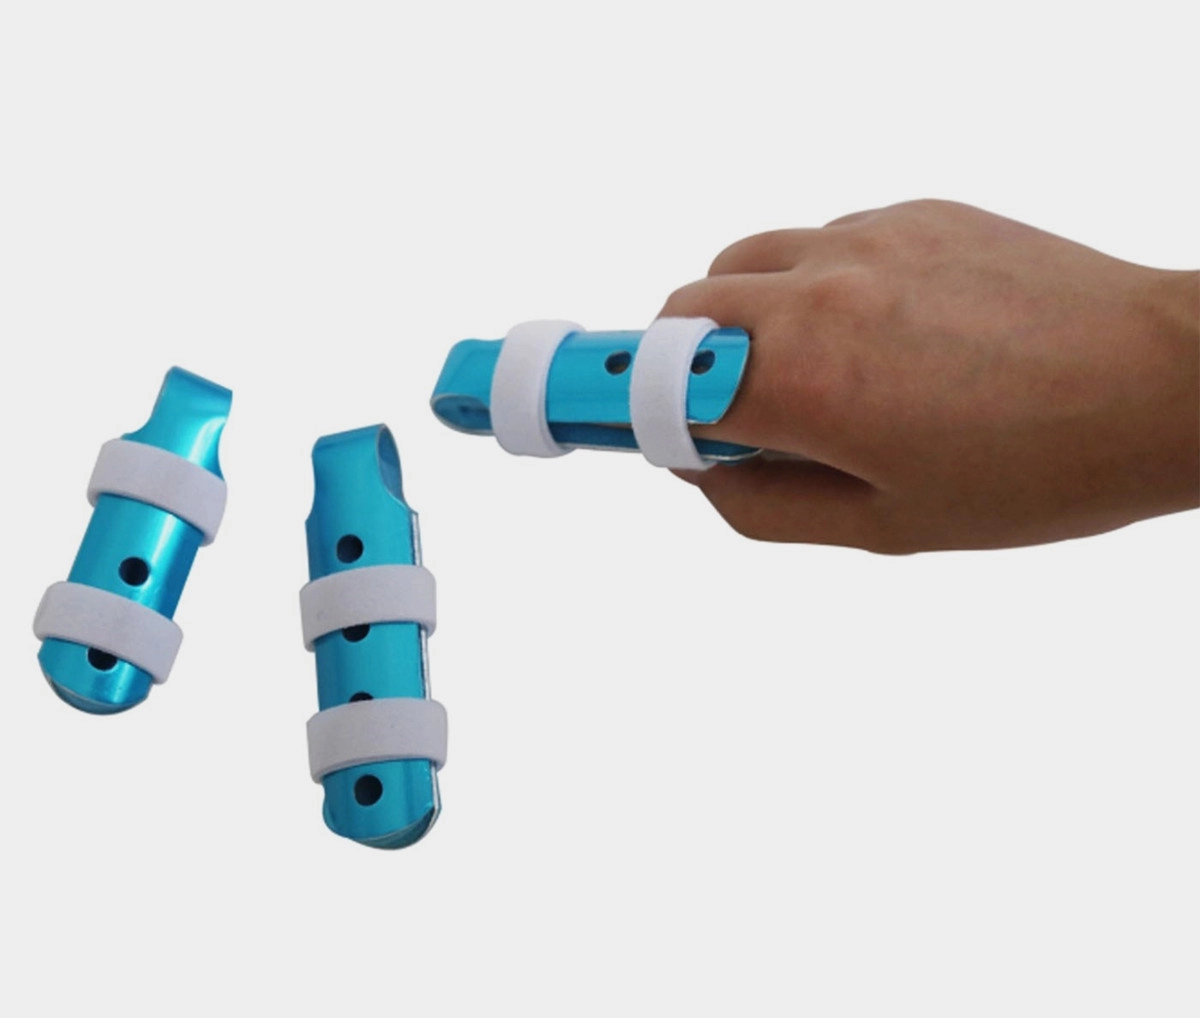 Adjustable Aluminum Cot Finger splint braces with or without  straps for protection or immobilization